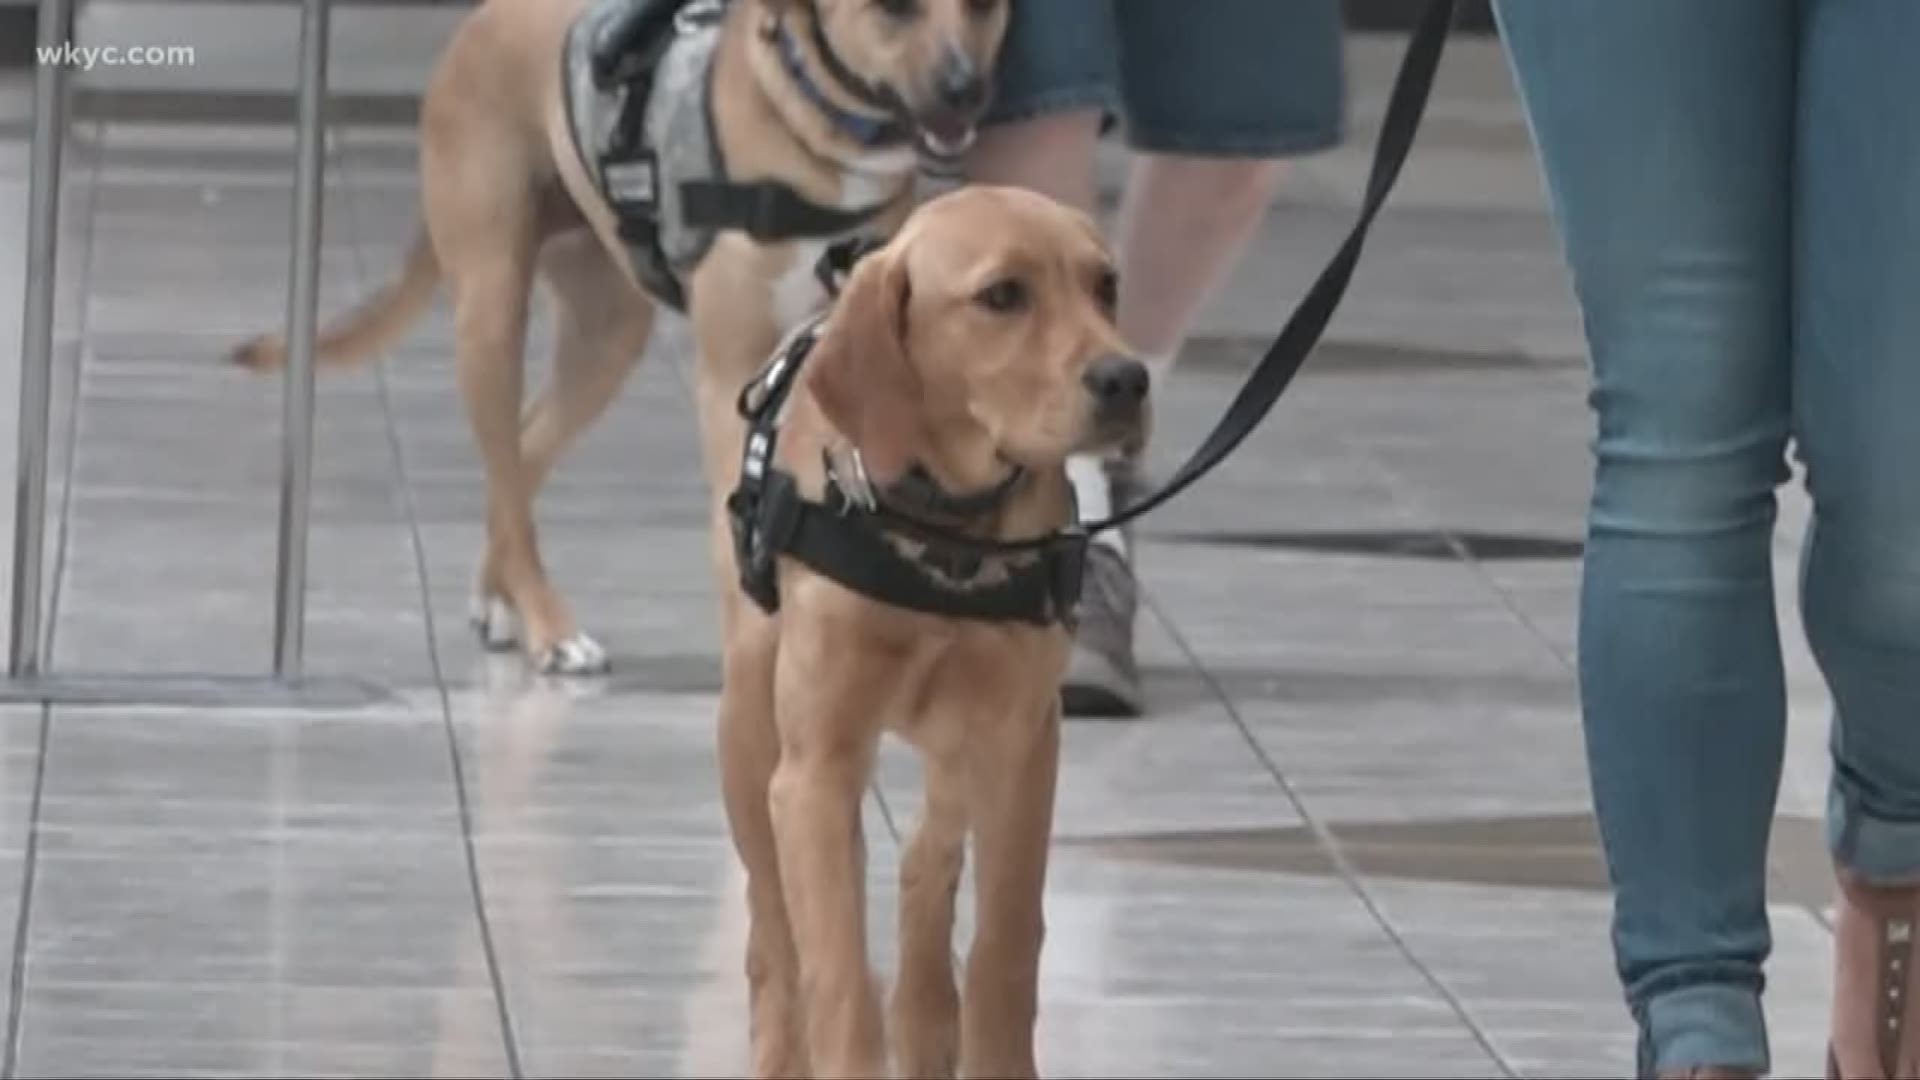 June 6, 2019: The mall is a popular place to head in the summer. Don’t be surprised if you find Roxy, our Wags 4 Warriors service pup-in-training, during your visit! Wags 4 Warriors does public access training every week at SouthPark Mall in Strongsville. Roxy has progressed so well in her own training that she got the greenlight to join the group.